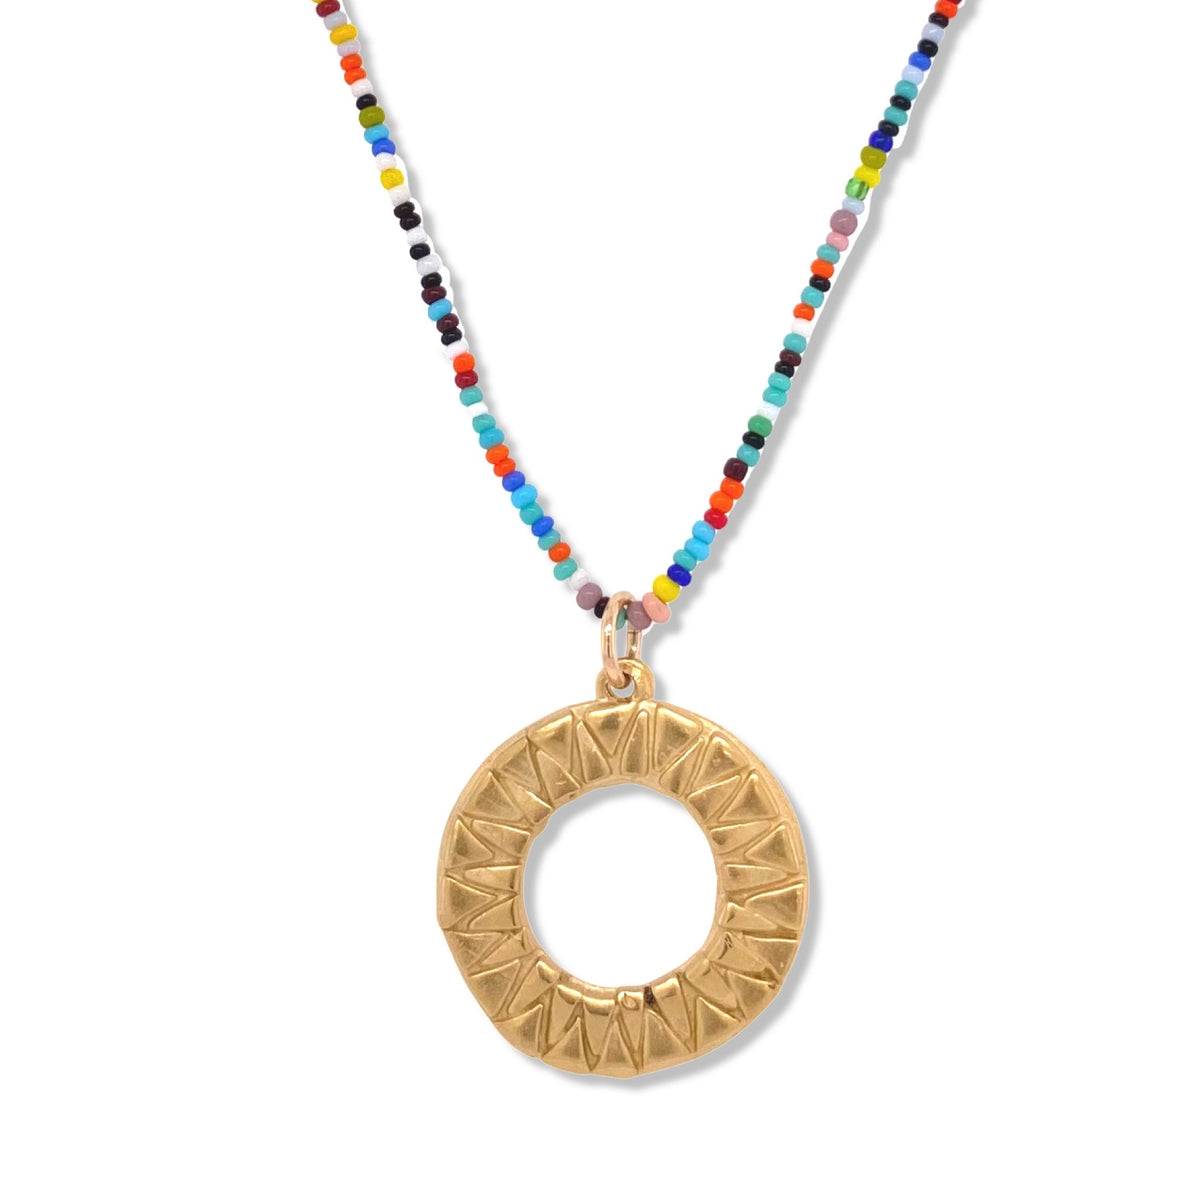 TRIBAL LOOP NECKLACE ON MULTI COLOR BEADS. | KEELY SMITH JEWELRY | NANTUCKET